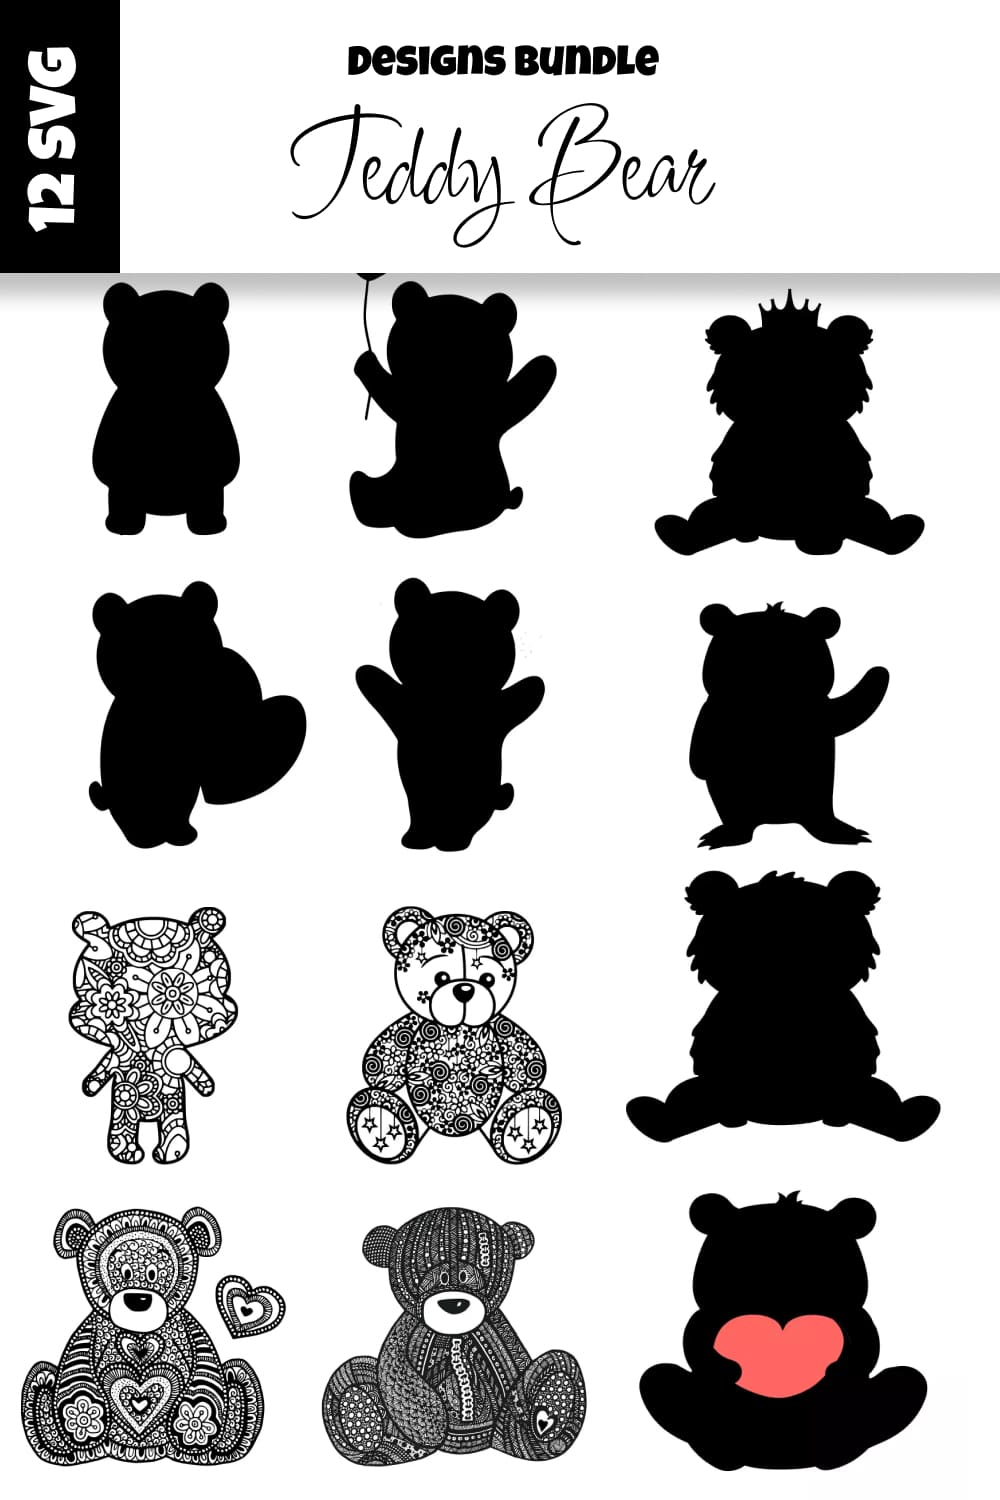 Teddy bear stencils are shown in black and white.